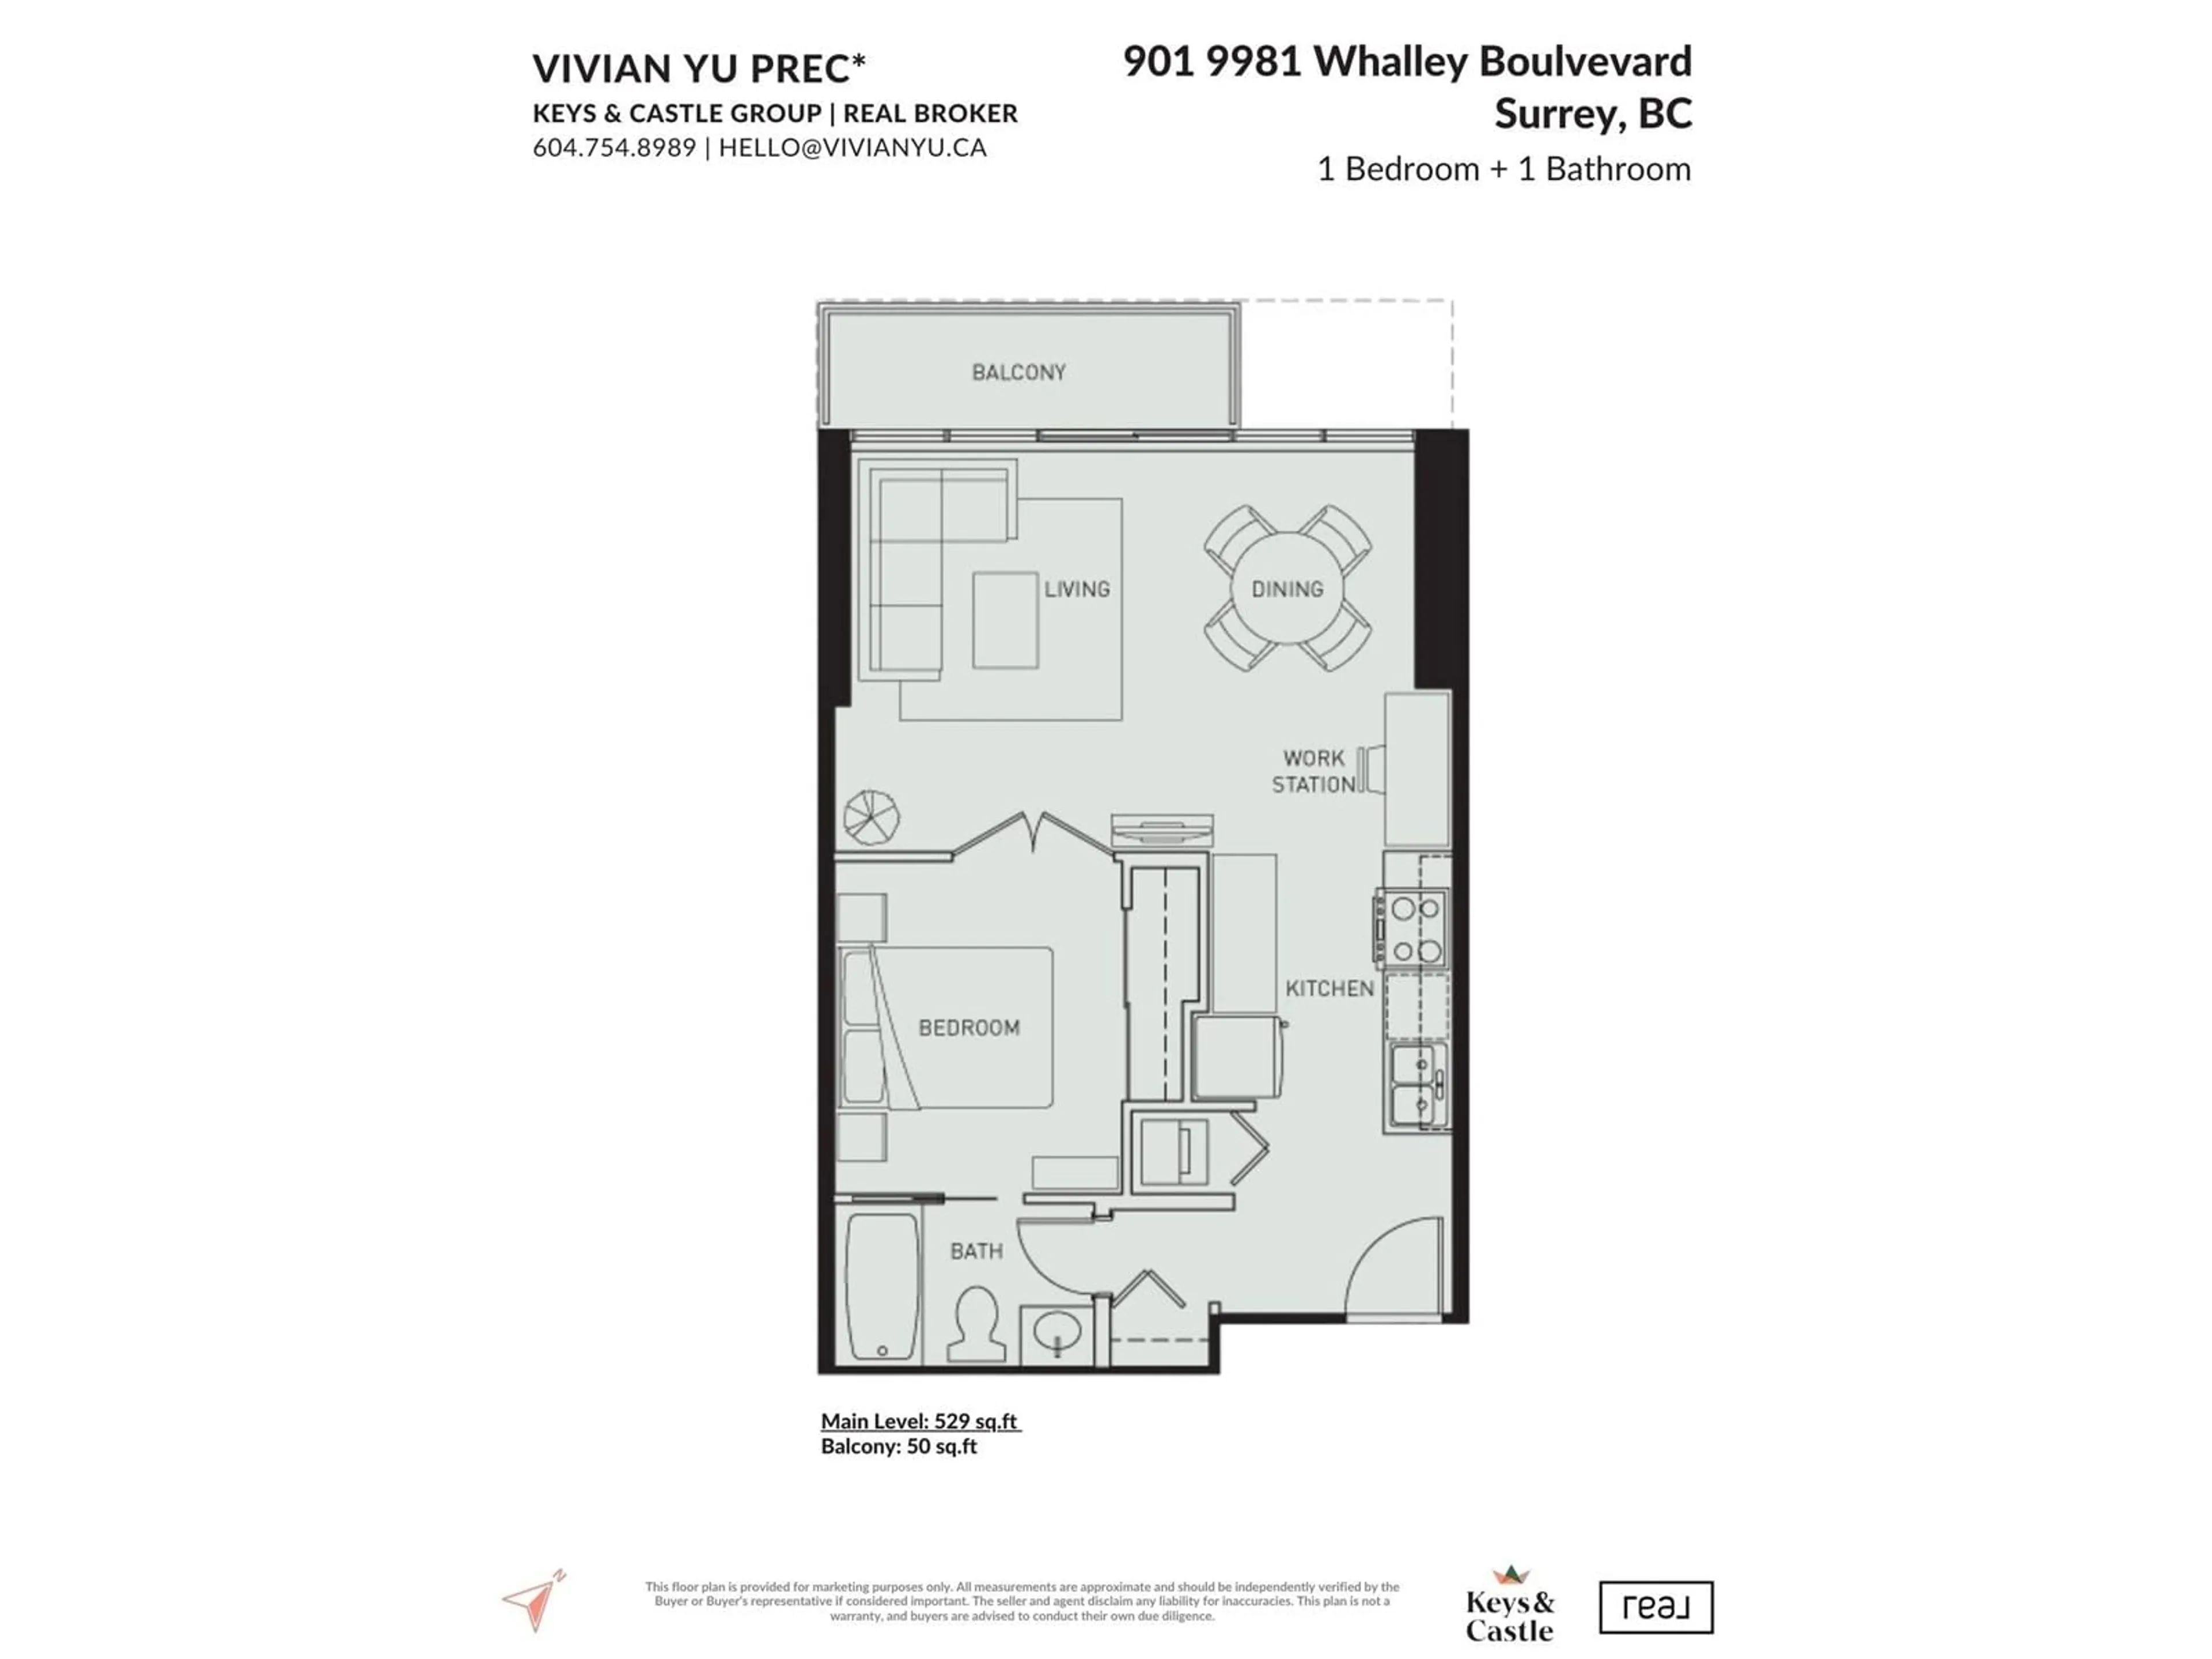 Floor plan for 901 9981 WHALLEY BOULEVARD, Surrey British Columbia V3T0G6